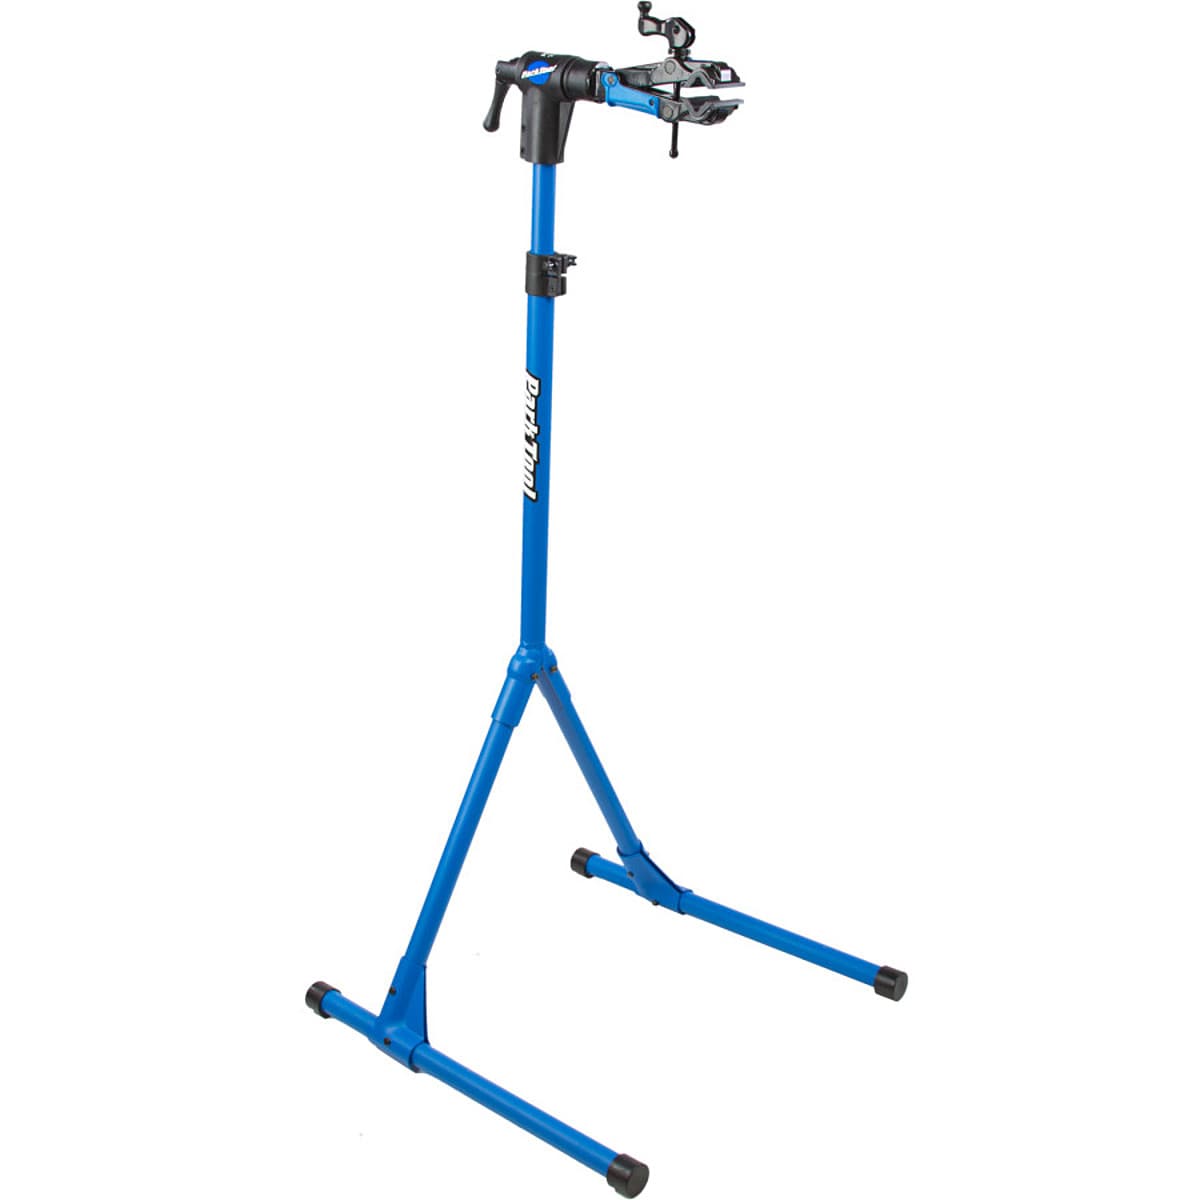 Park Tool Deluxe Home Mechanic Repair Stand PCS-4-2, One Size